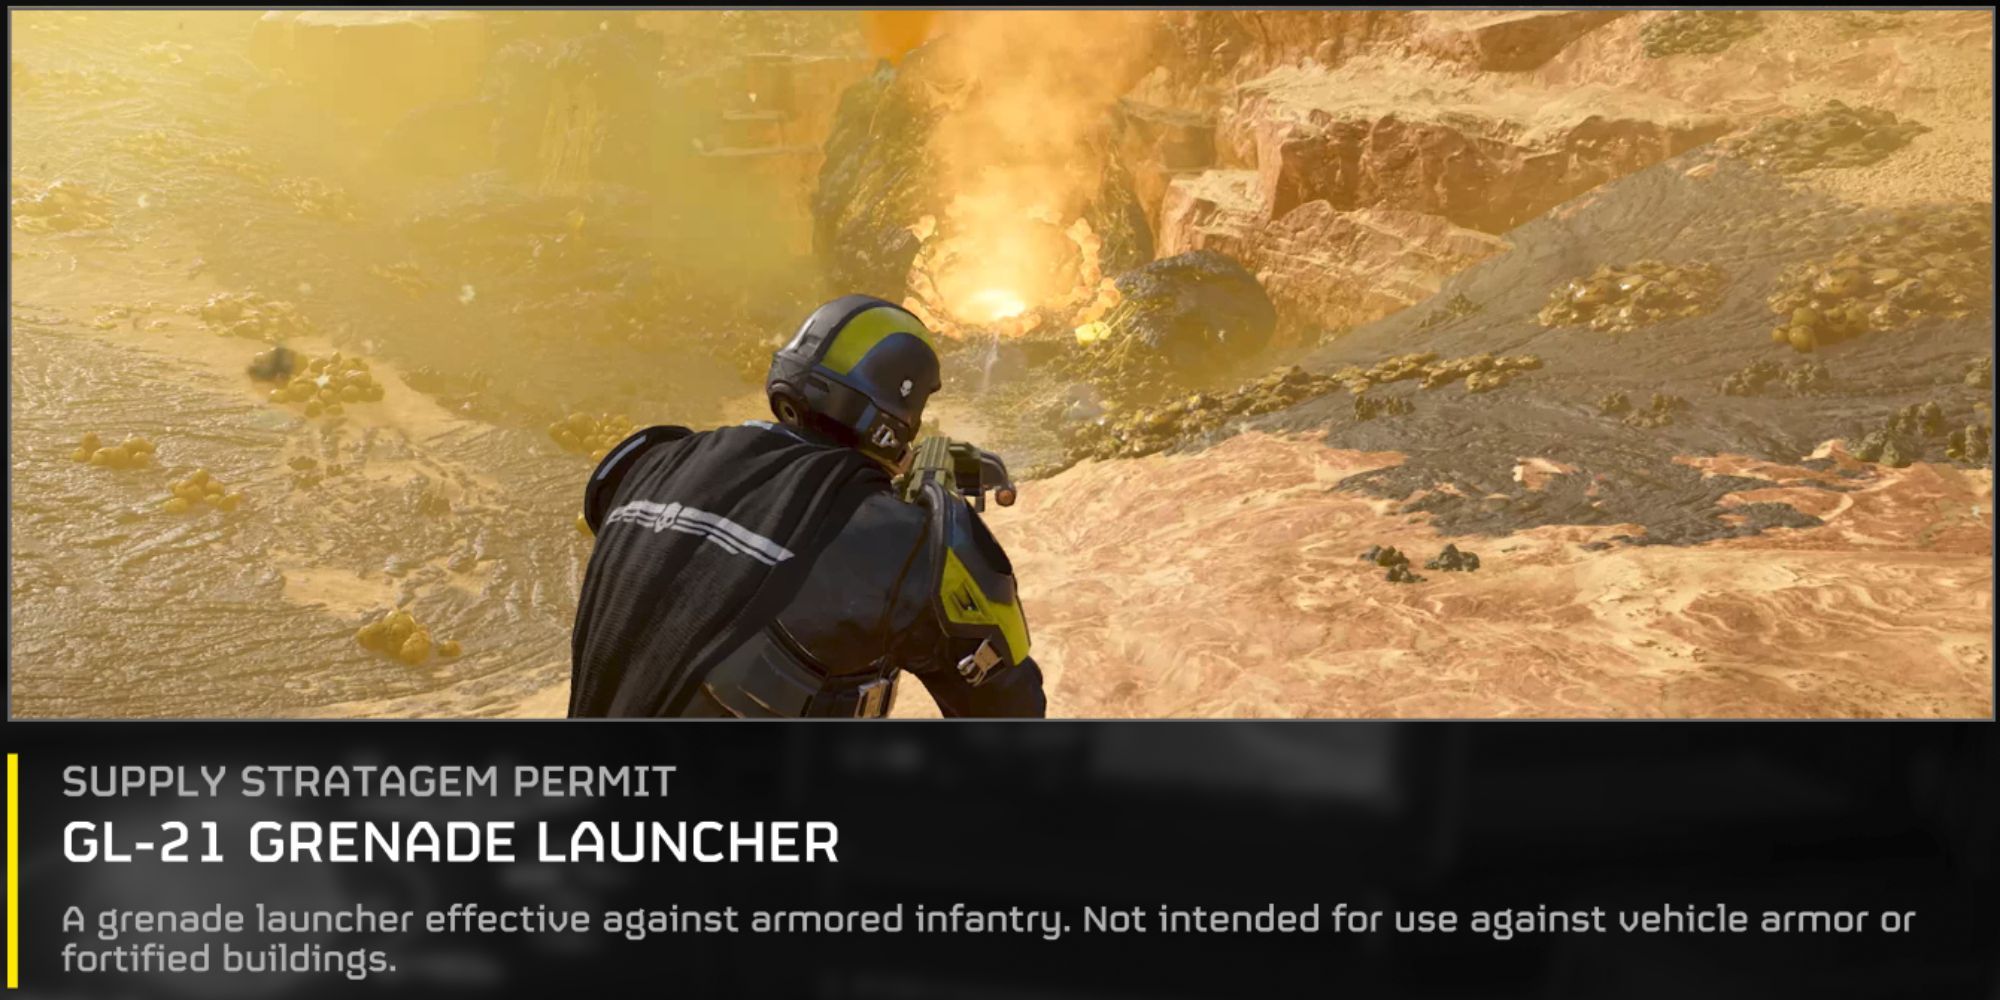 A Helldiver using a Grenade Launcher to close a Terminid Nest